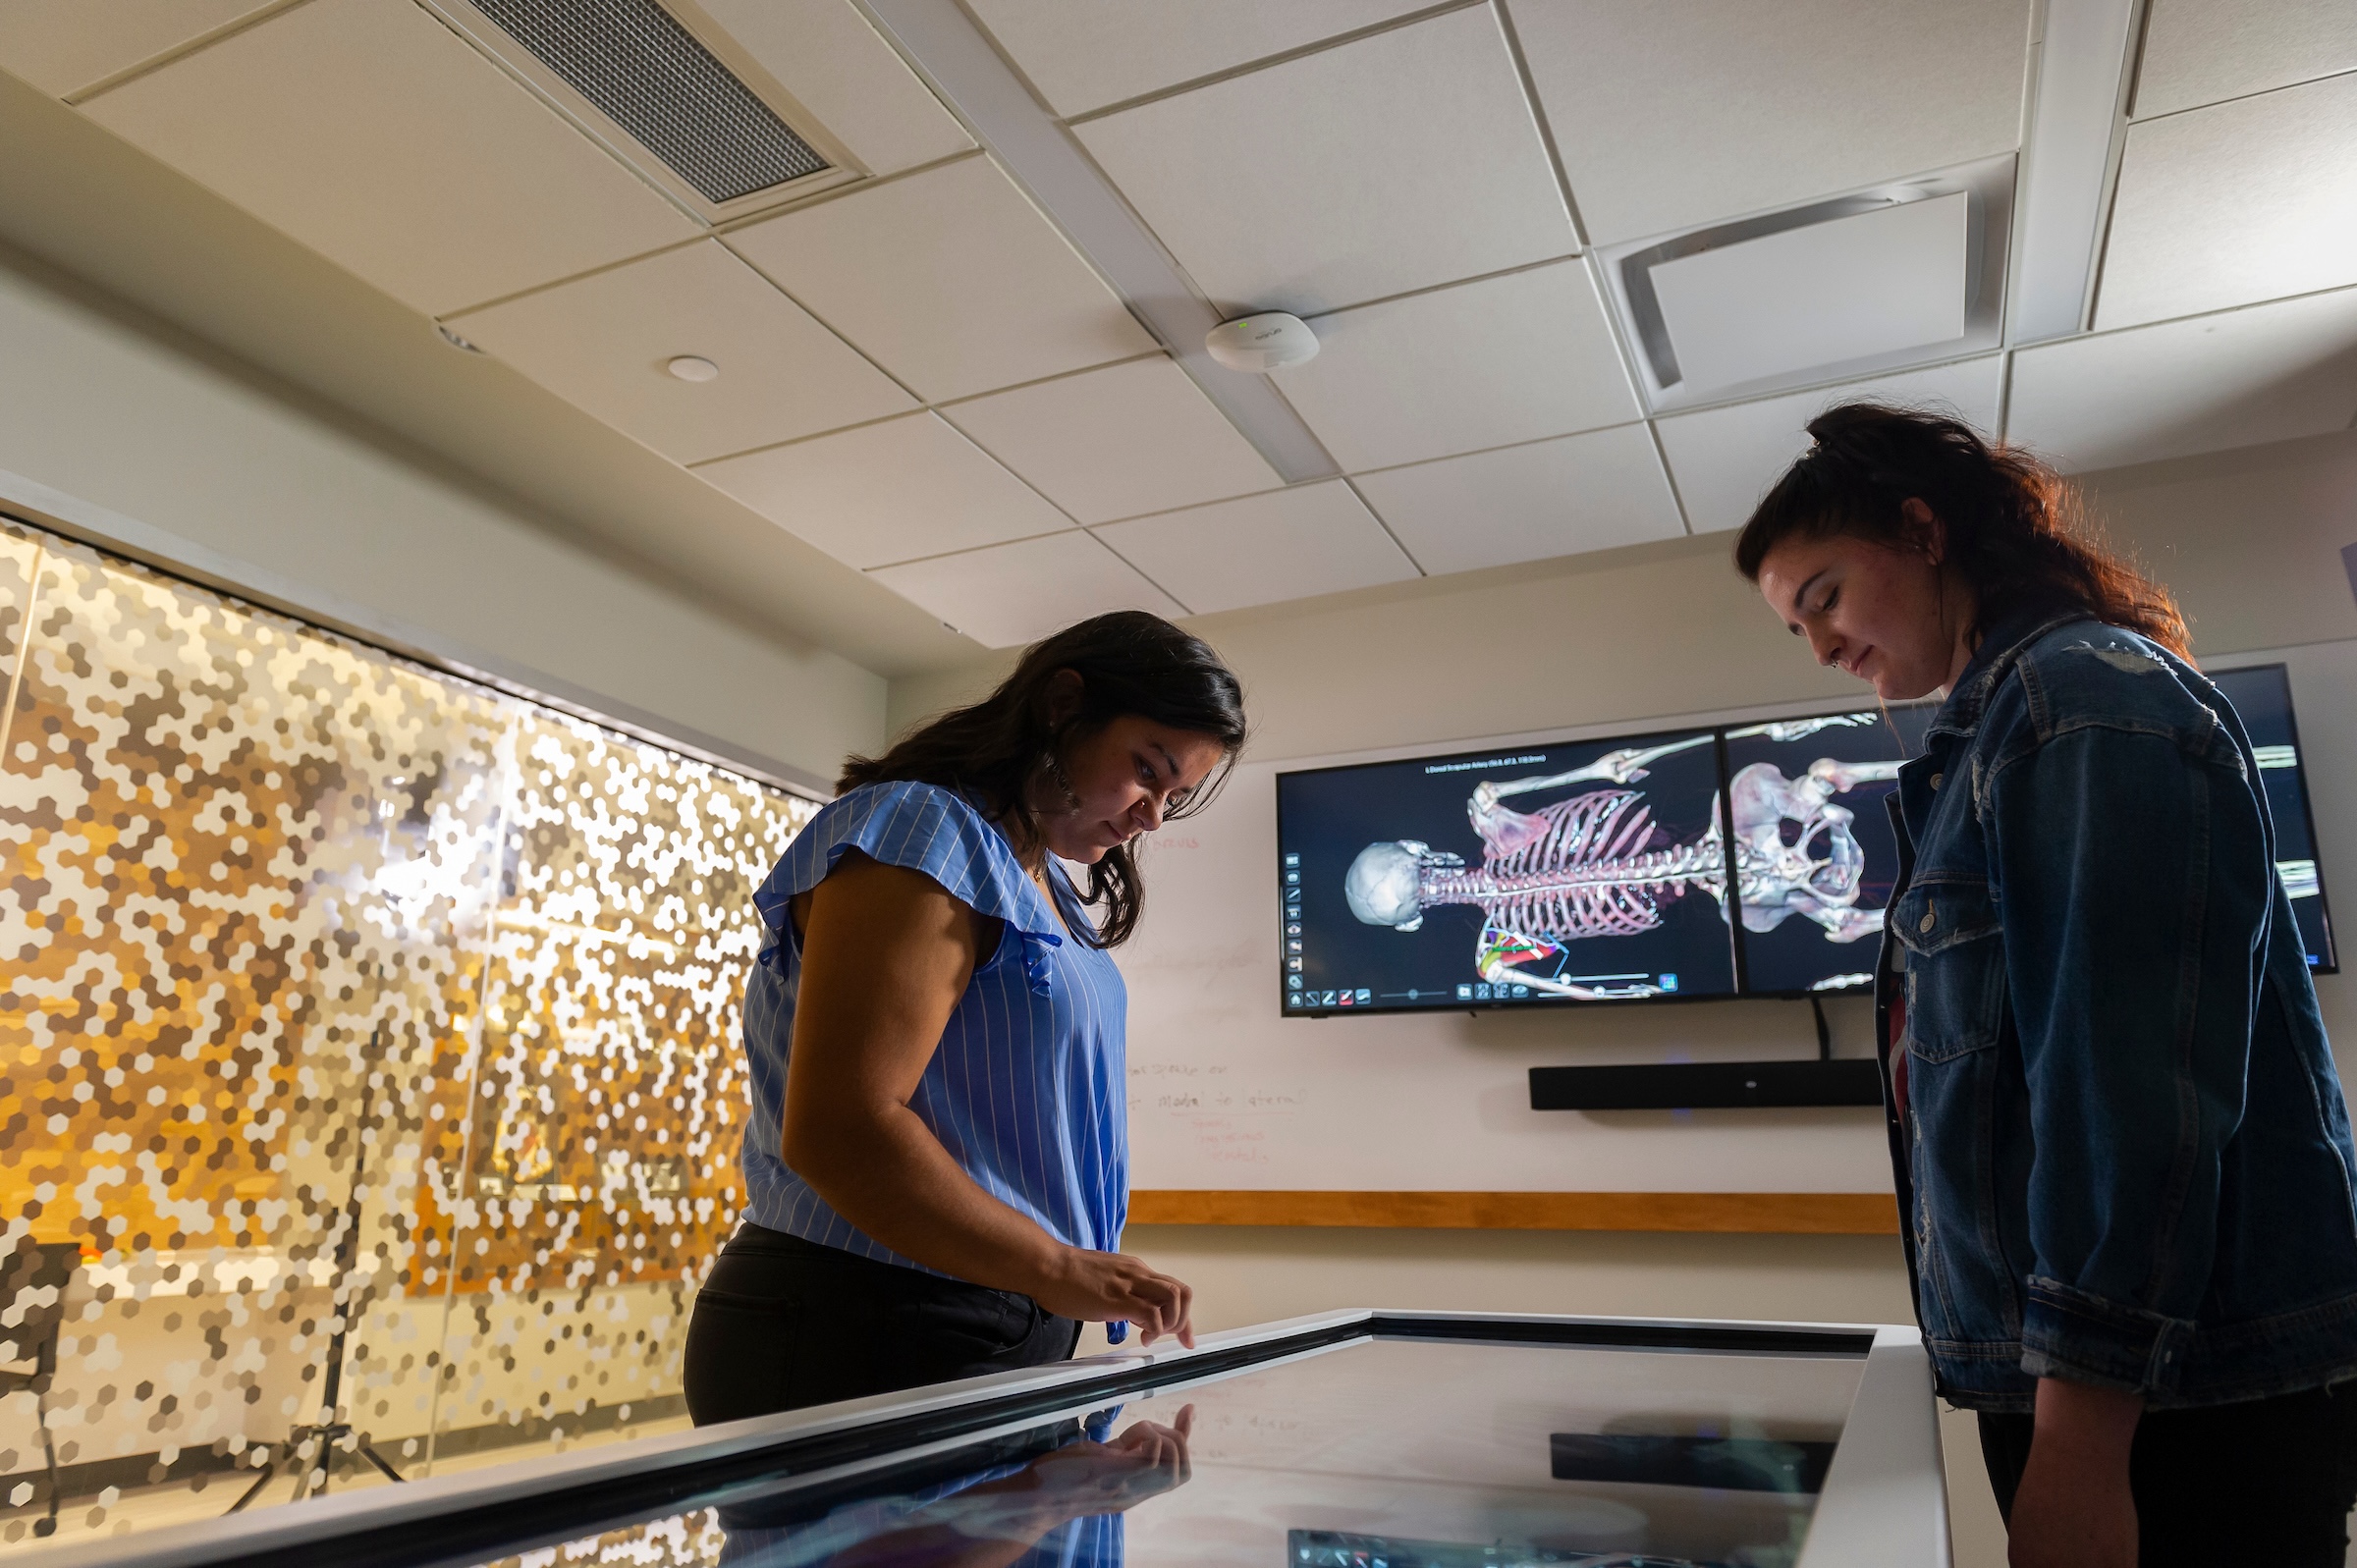 USF’s Sciences division has an Anatomage Table used to enhance anatomy and physiology courses, advanced physiology and pathophysiology, and comparative anatomy.